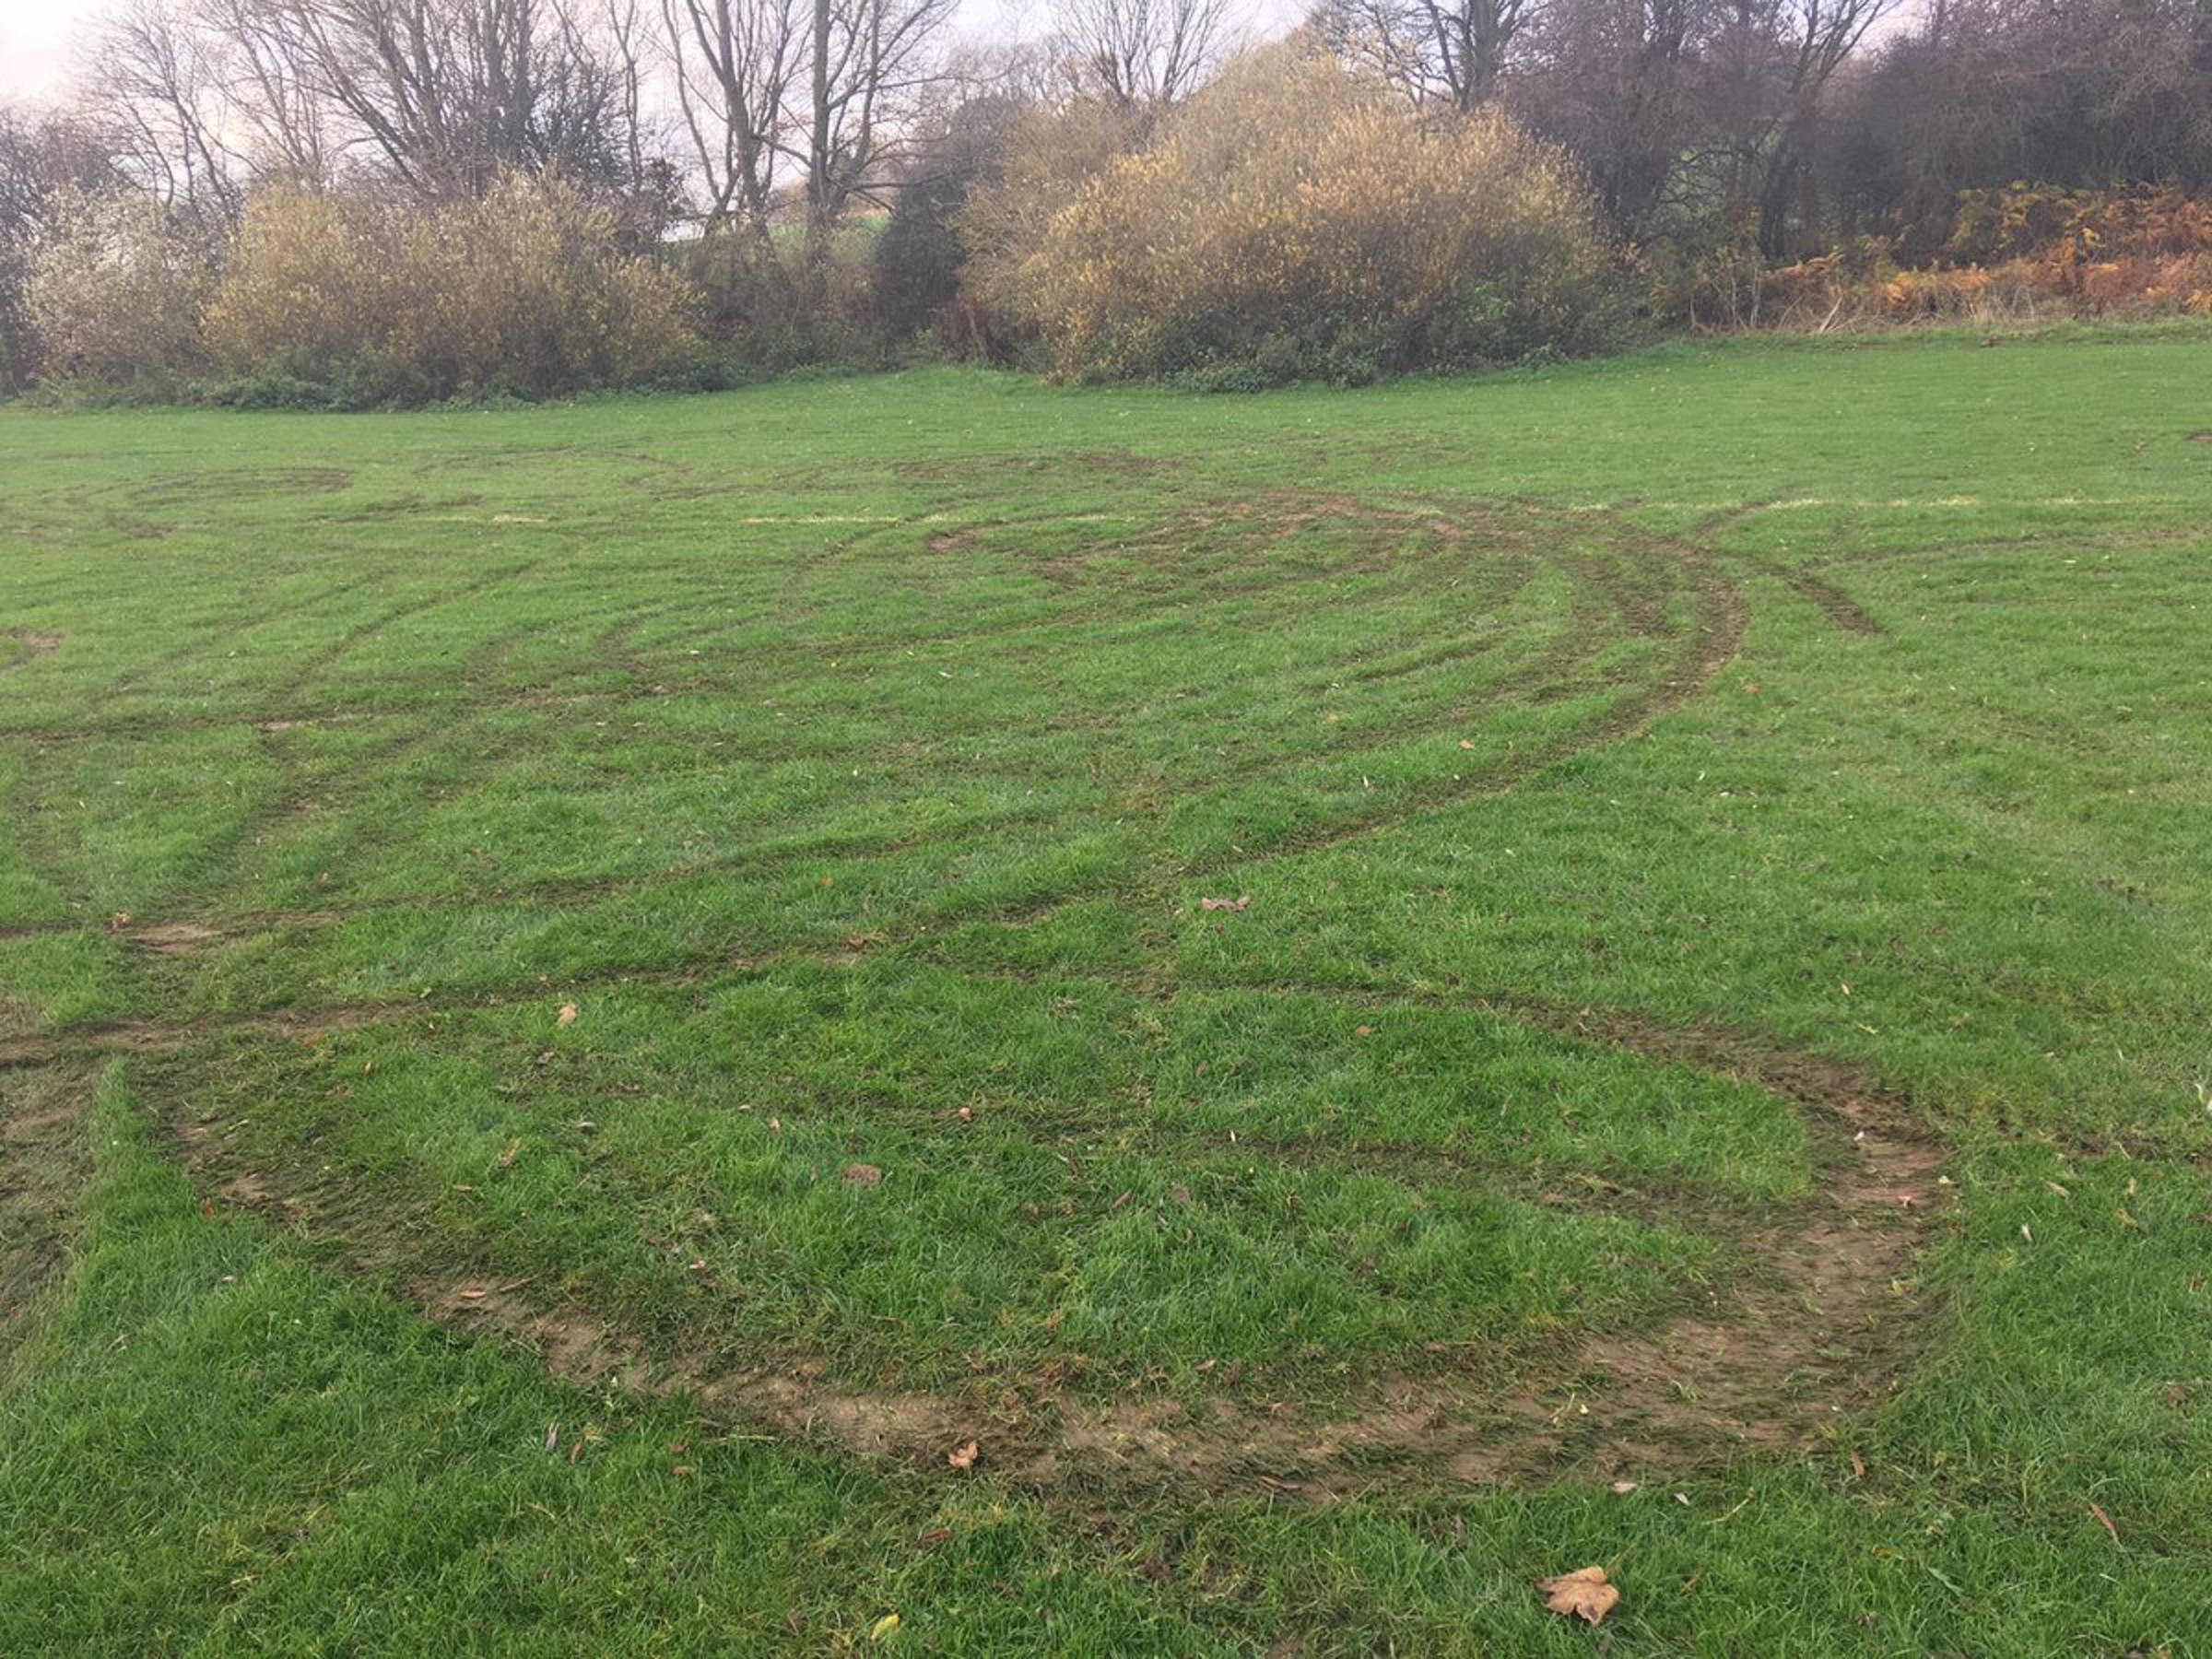 The disgraceful aftermath of what the mini moto and quad bike riders have been doing in East Wemyss.